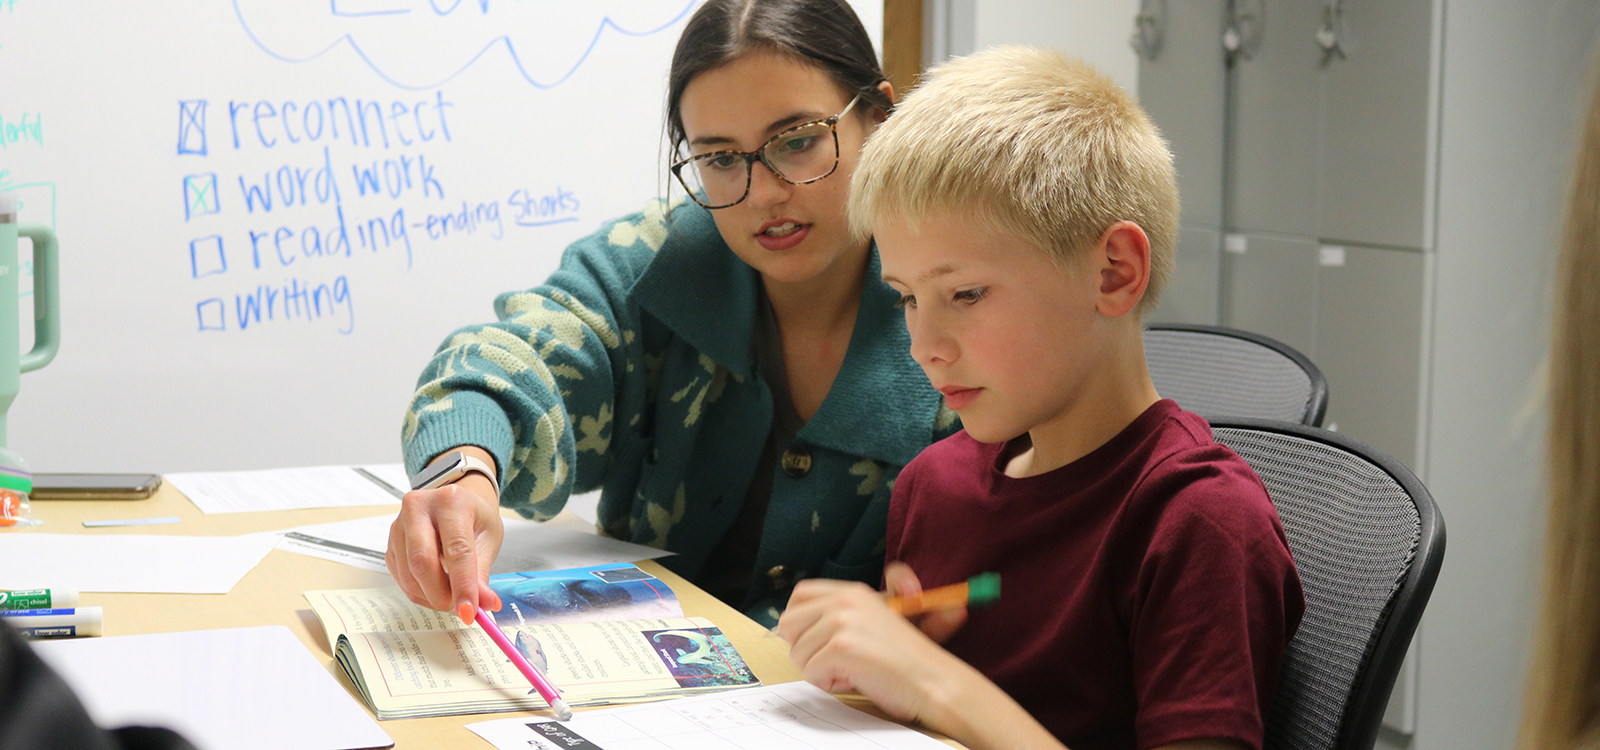 A Husker student explains a reading comprehension activity to a young boy during a tutoring session at the Schmoker Reading Center.